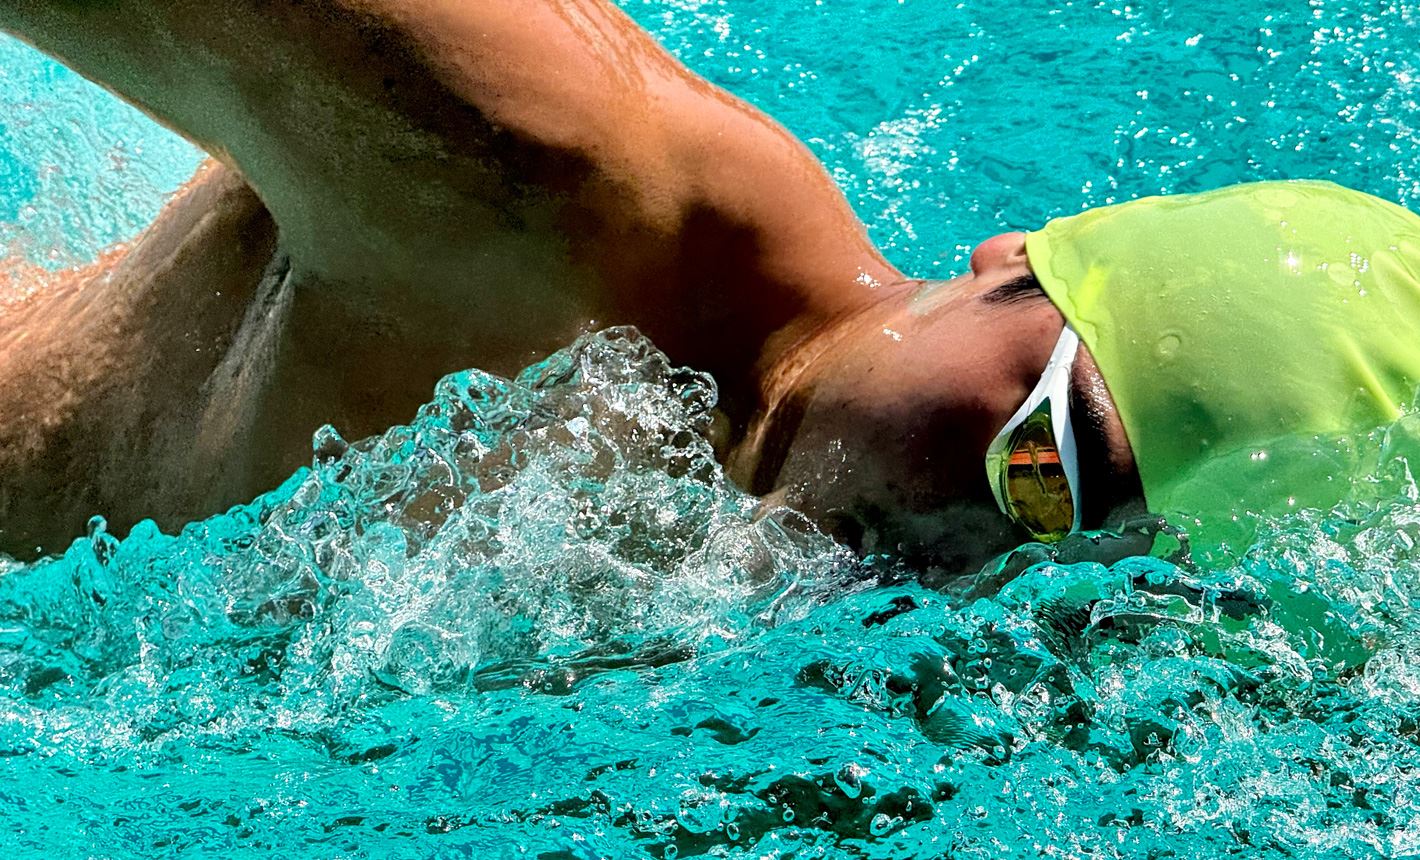 A very detailed, zoomed in shot of a swimmer in a pool with water splashing around him